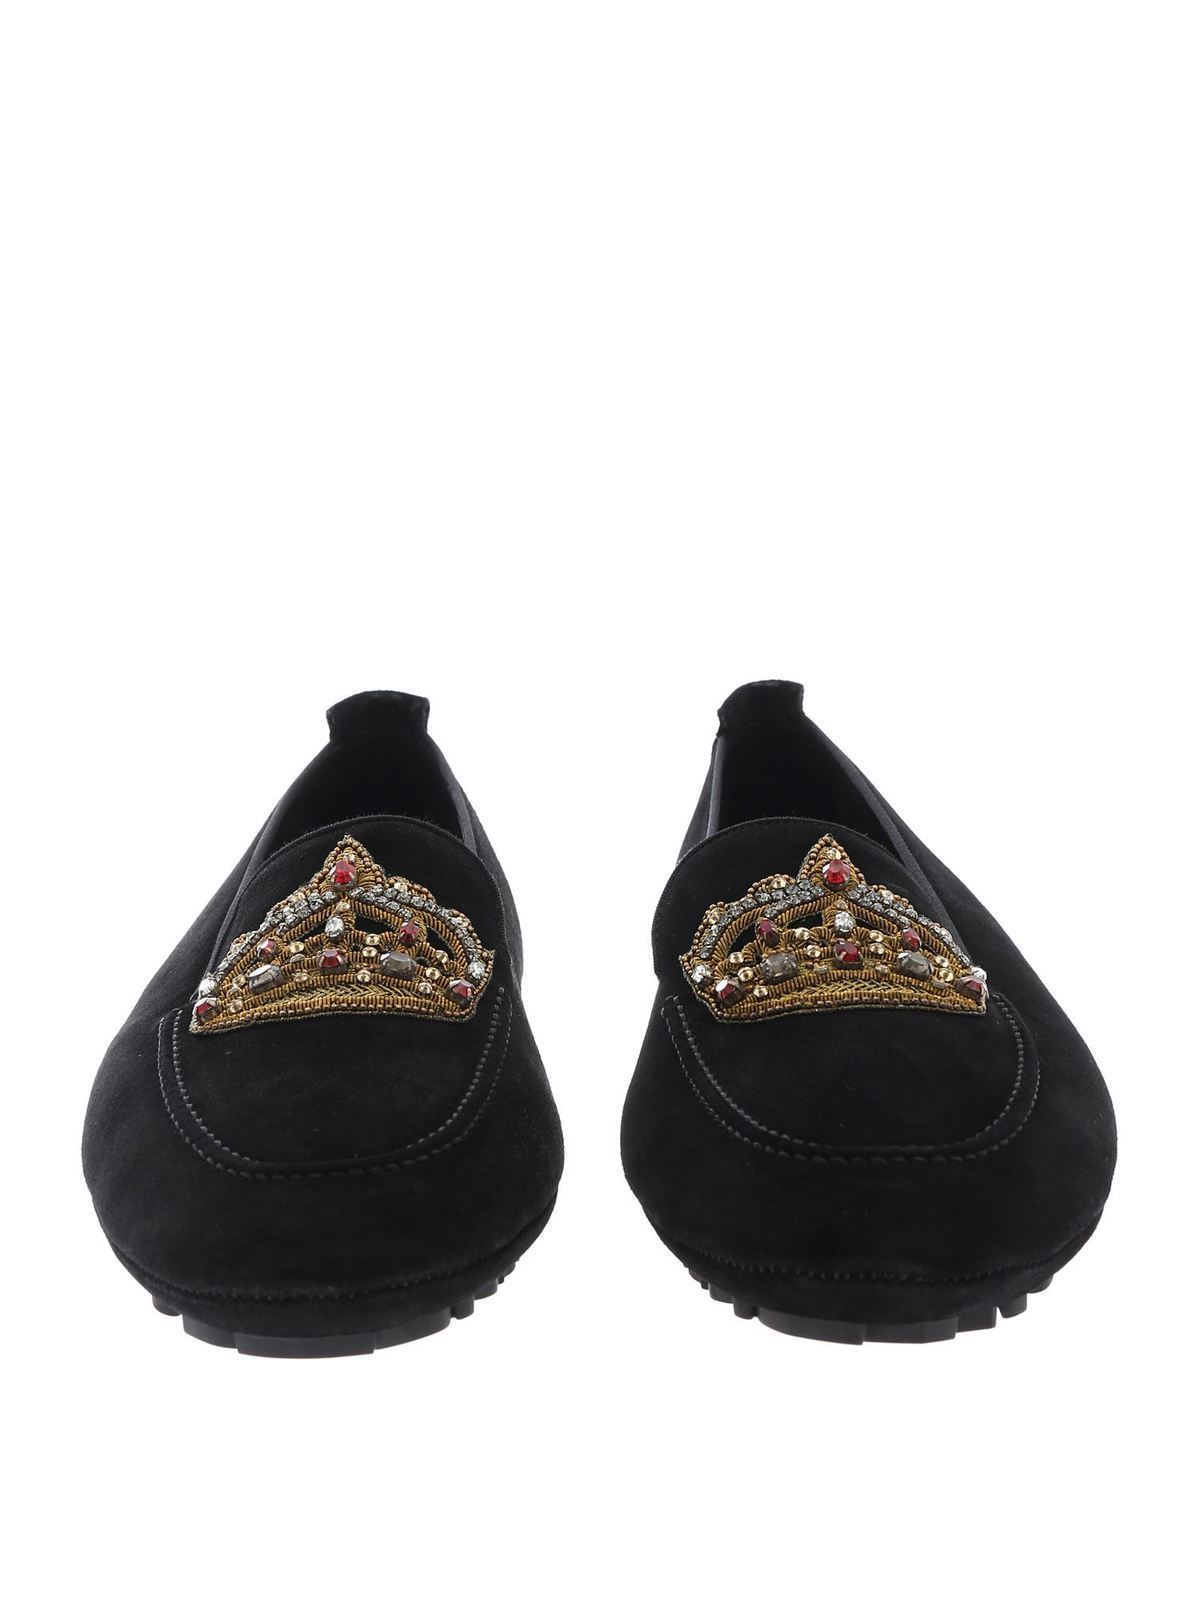 Loafers & Slippers Dolce & Gabbana - Embroidered crown loafers -  A50280AK30280999